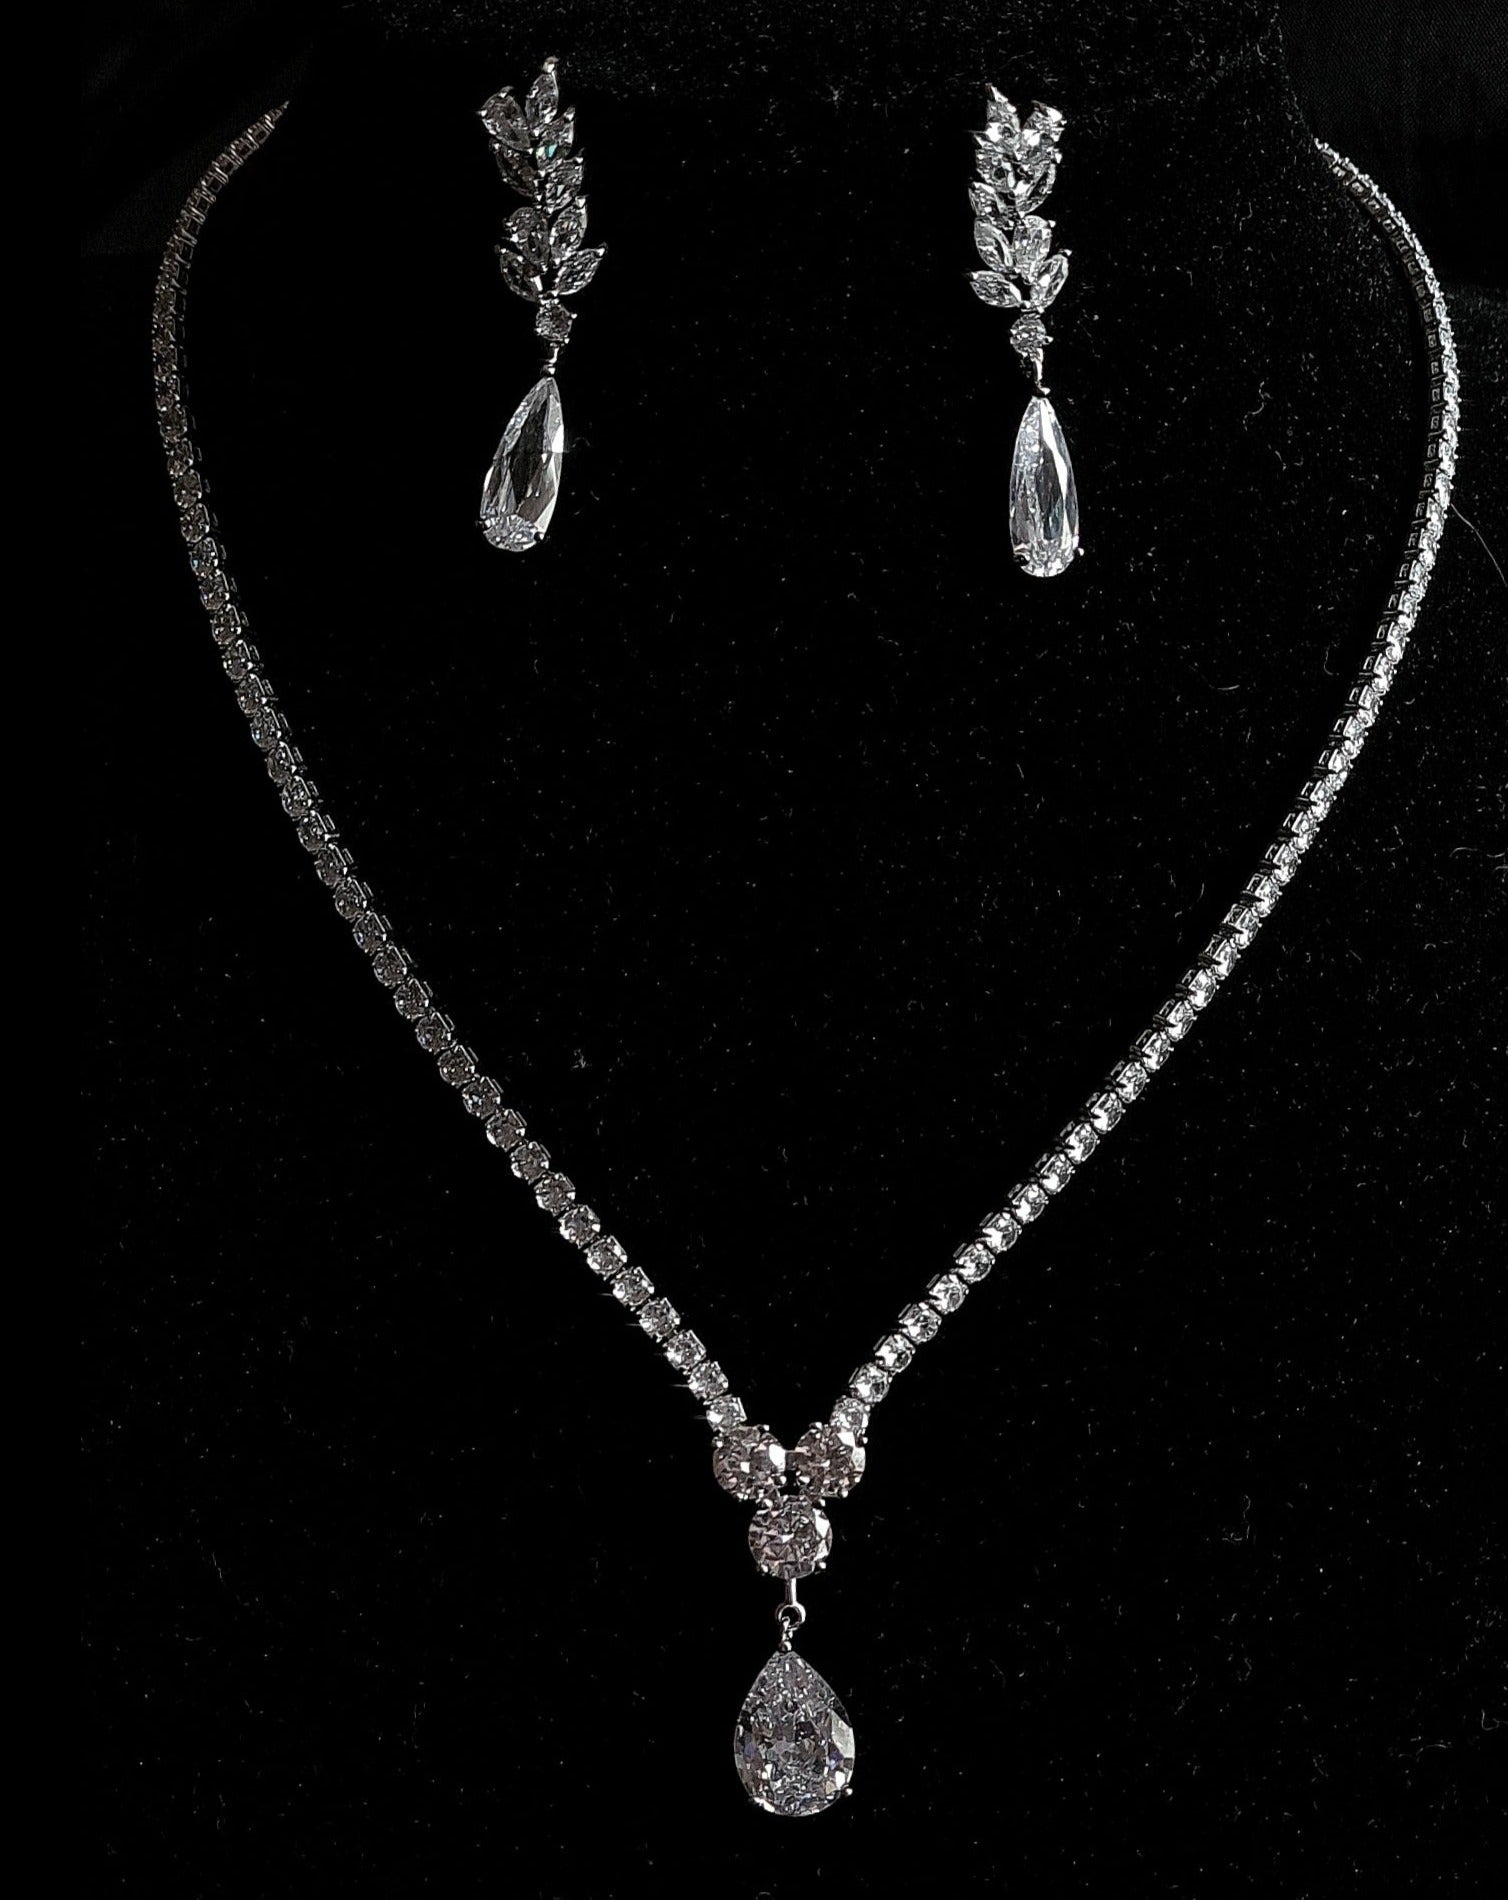  Elegant Jewelry Set with cubic zirconia stone Rose Necklace and the delicate Ari Earrings,